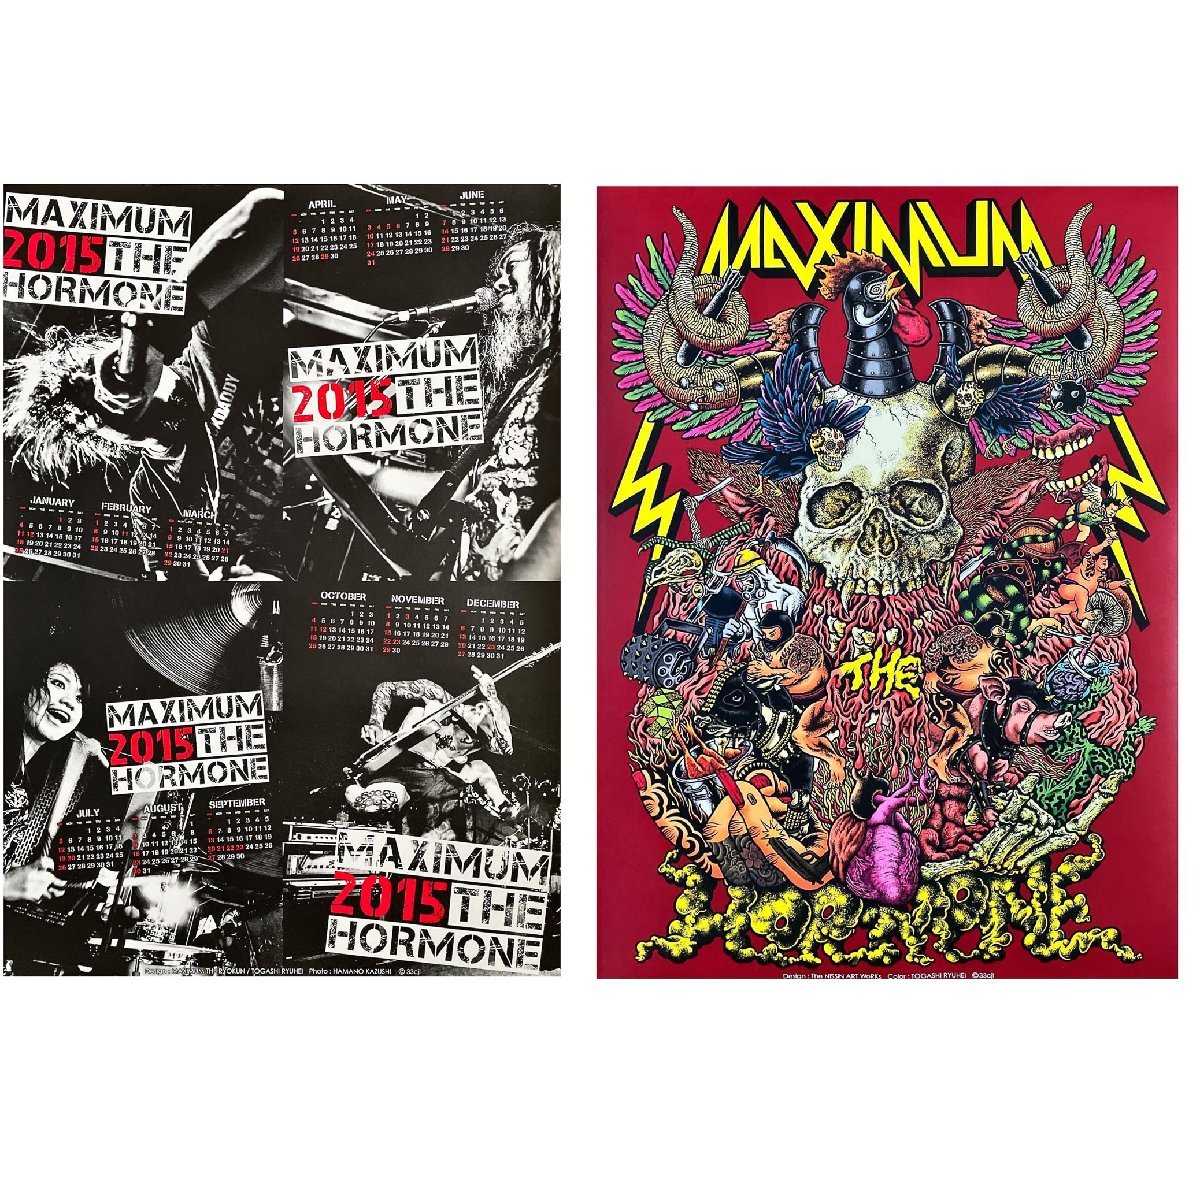 Search Results for "Maximum the hormone" /Buyee Buyee